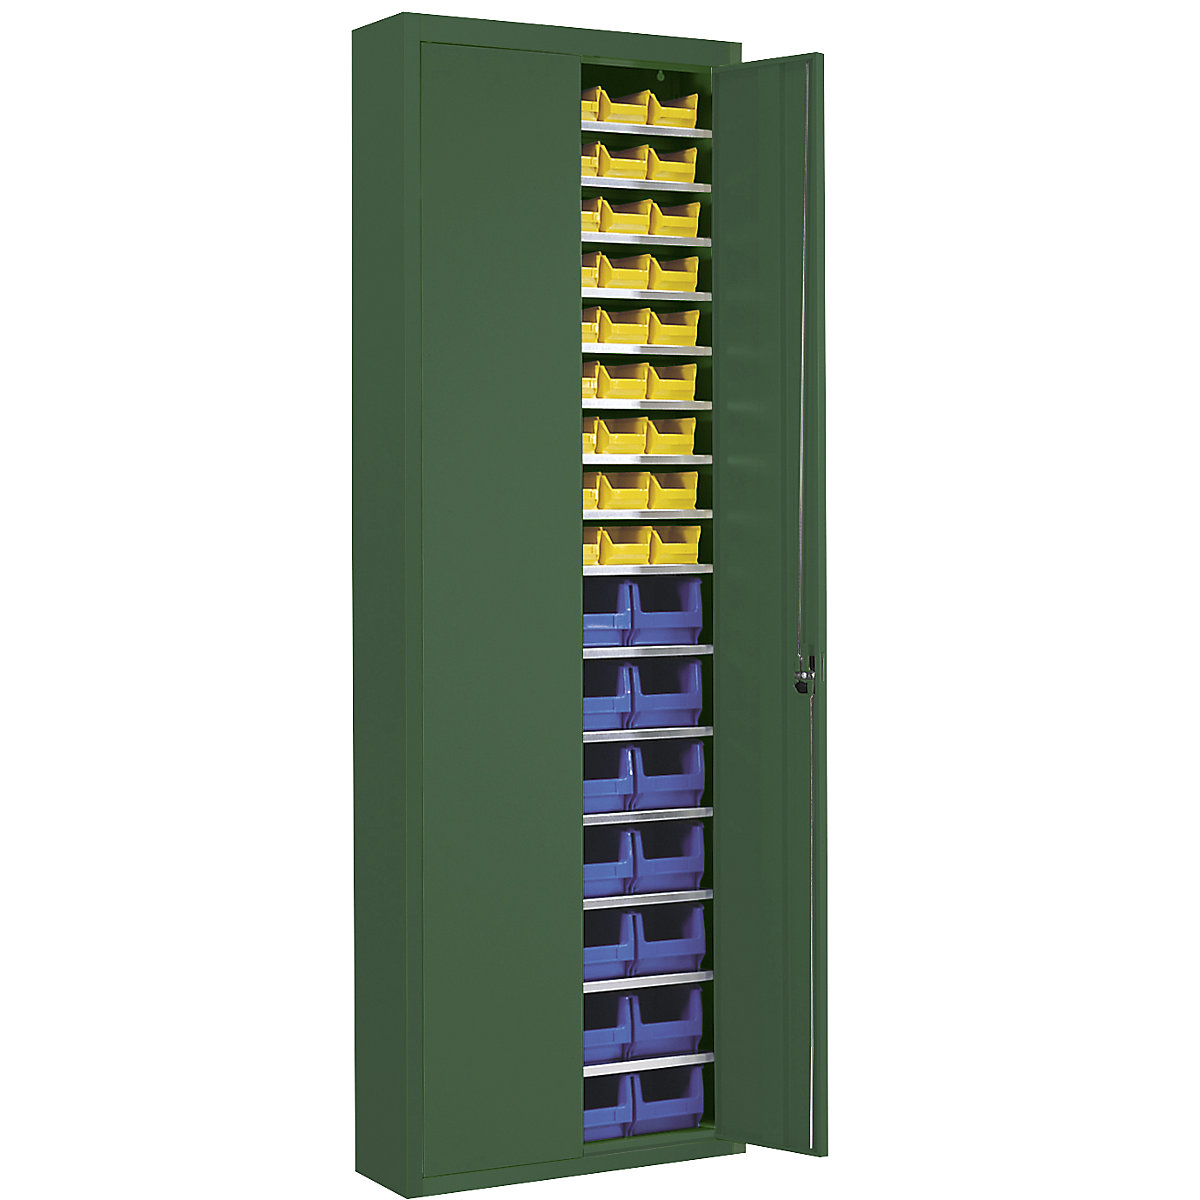 Storage cupboard with open fronted storage bins – mauser, HxWxD 2150 x 680 x 280 mm, single colour, green, 82 bins-7